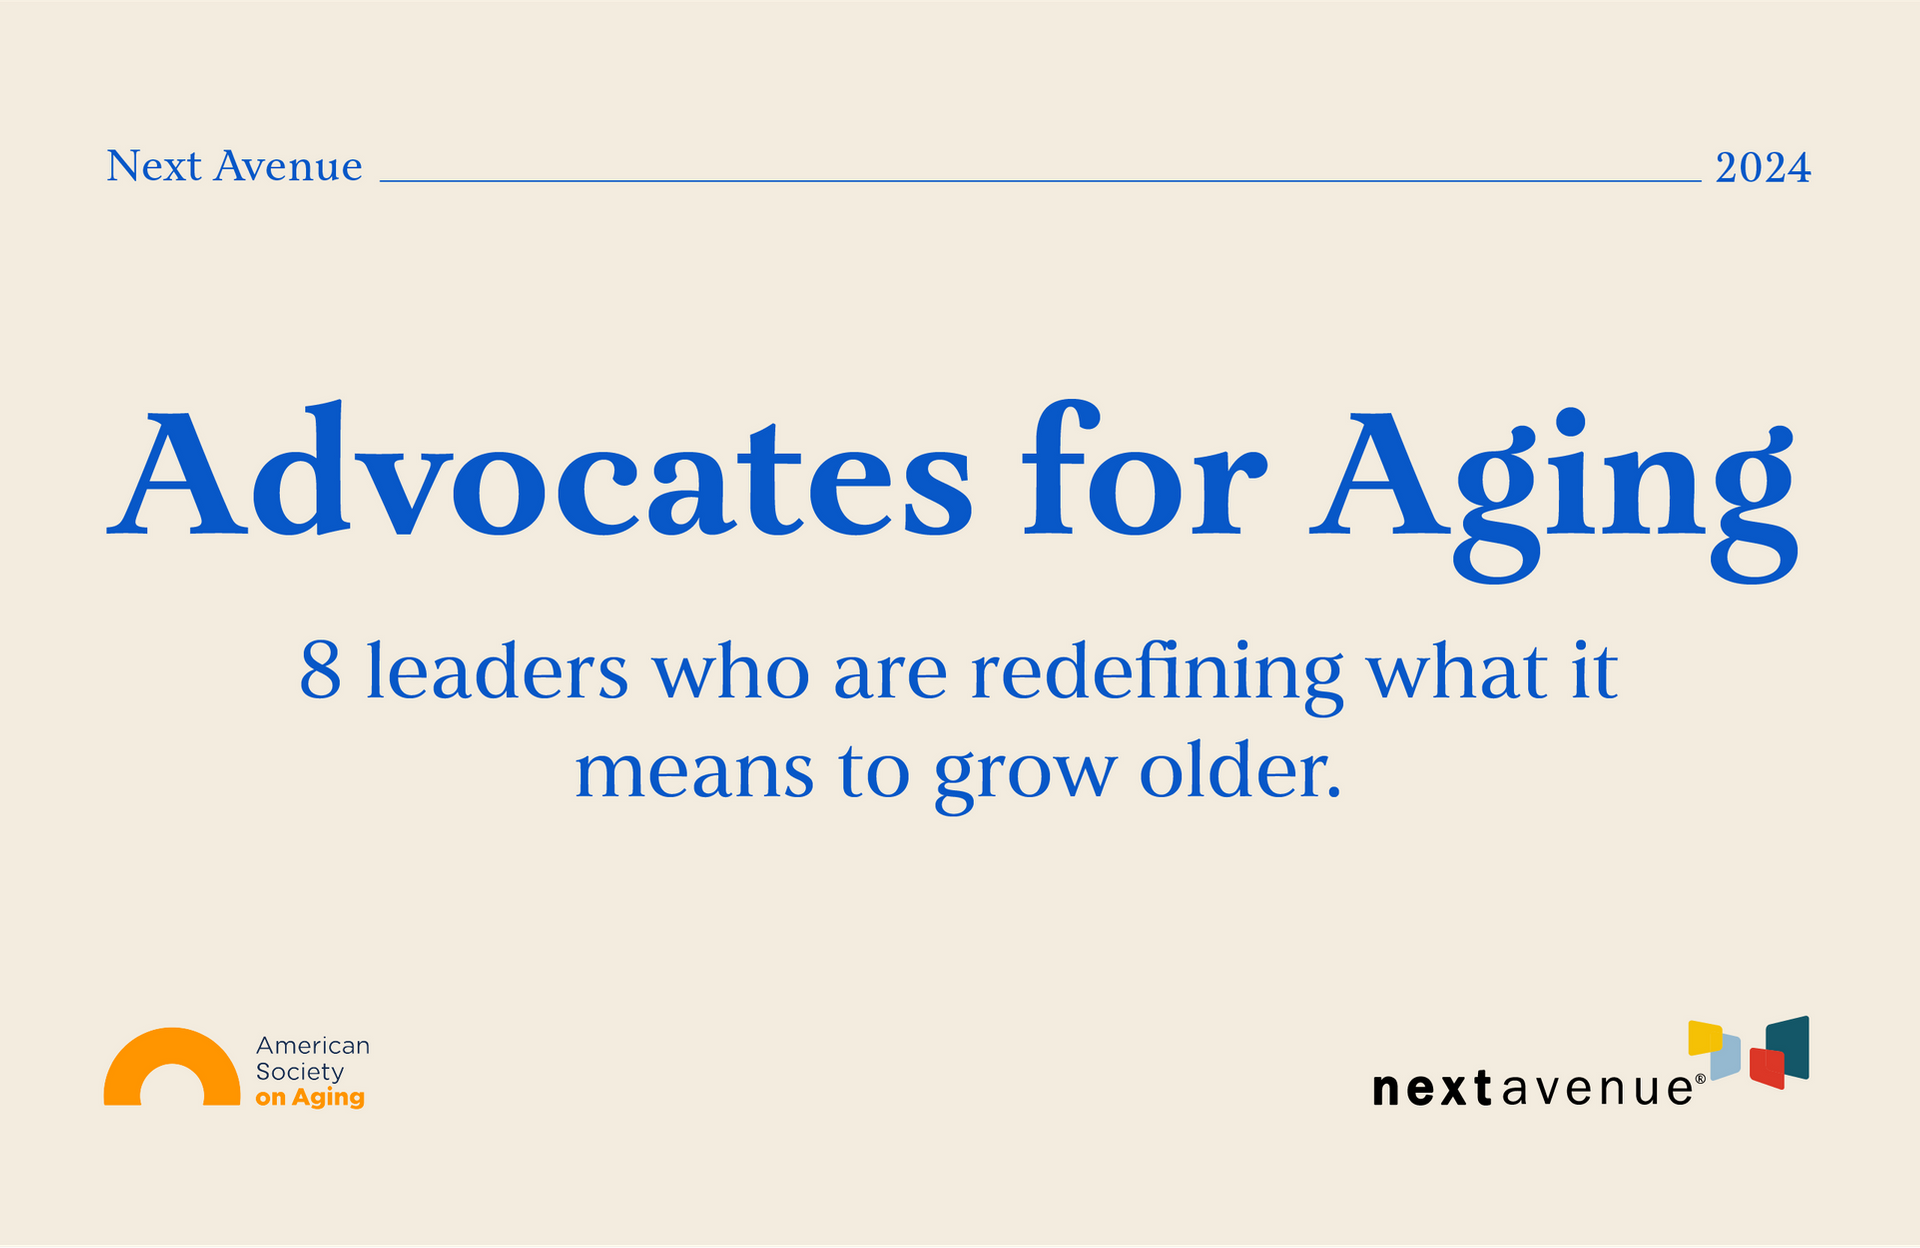 A graphic that says, "Next Avenue 2024 Advocates for Aging".